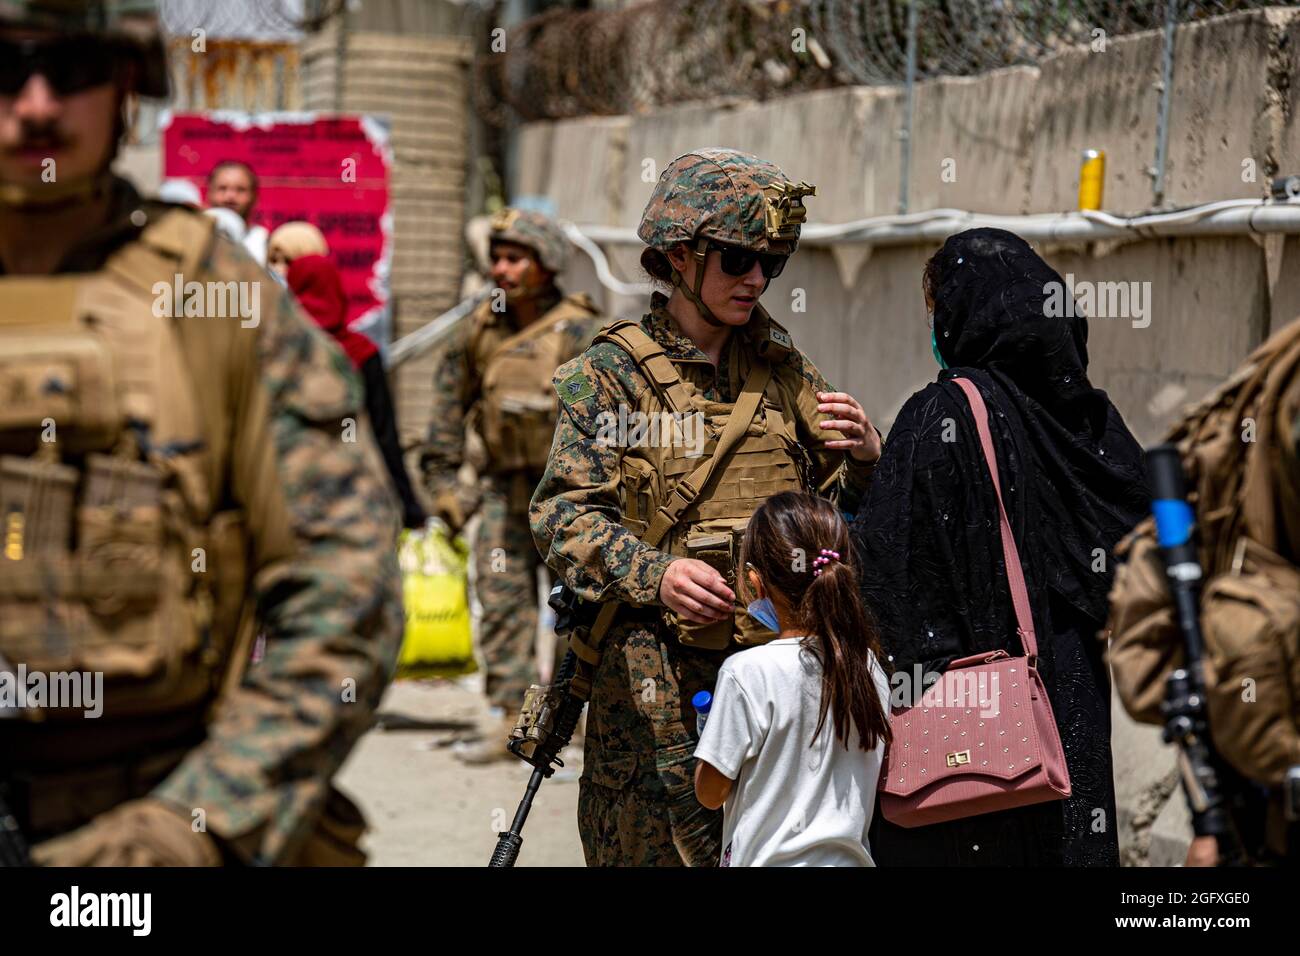 A Marine assists a woman and child during an evacuation at Hamid Karzai International Airport, Aug. 18. U.S. service members are assisting the Department of State with an orderly drawdown of designated personnel in Afghanistan. (U.S. Marine Corps photo by 1stLt. Mark Andries) Stock Photo